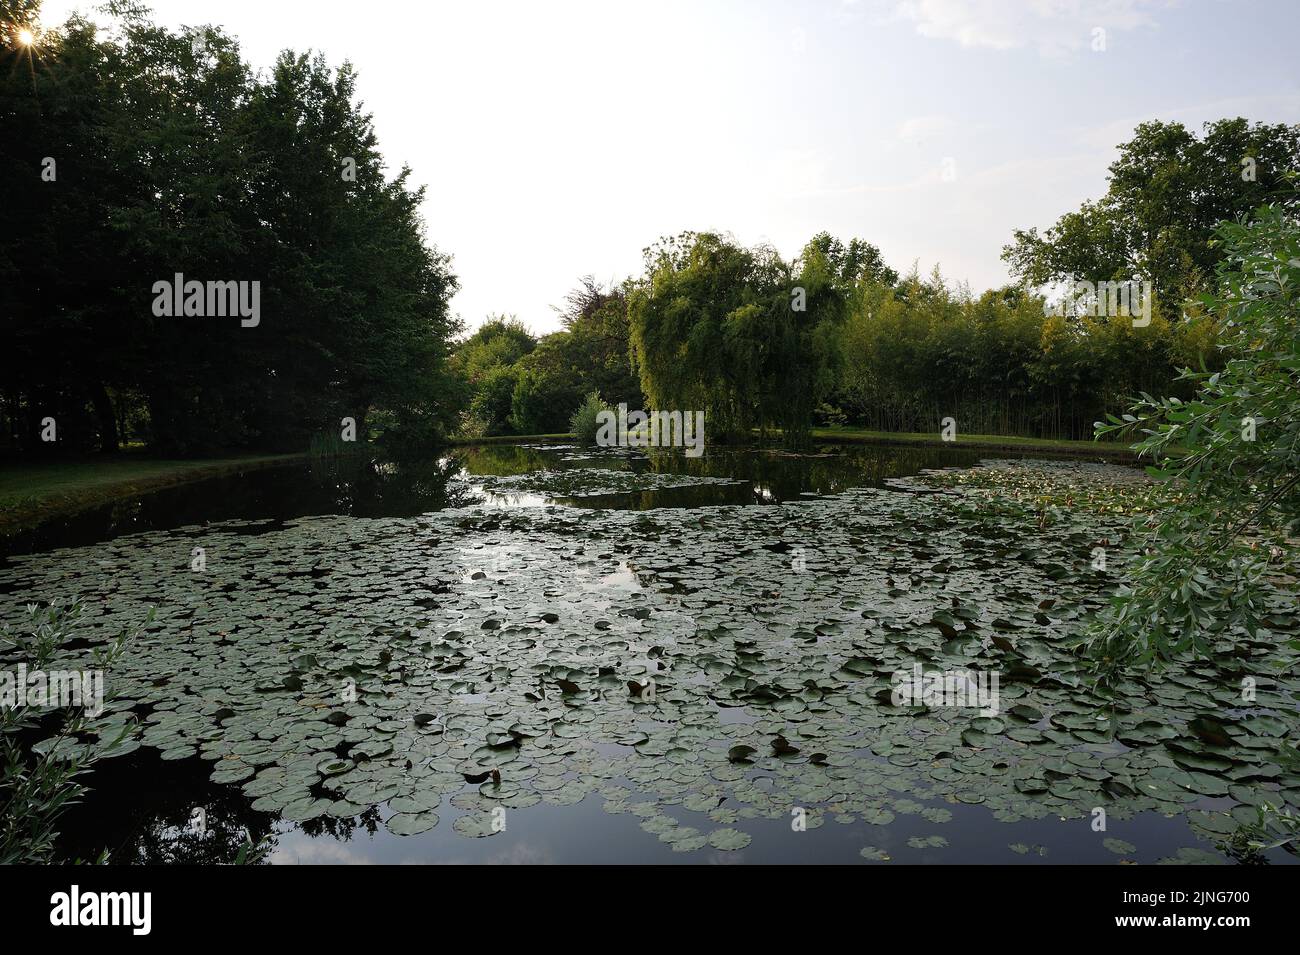 The lake of water lilies. Stock Photo